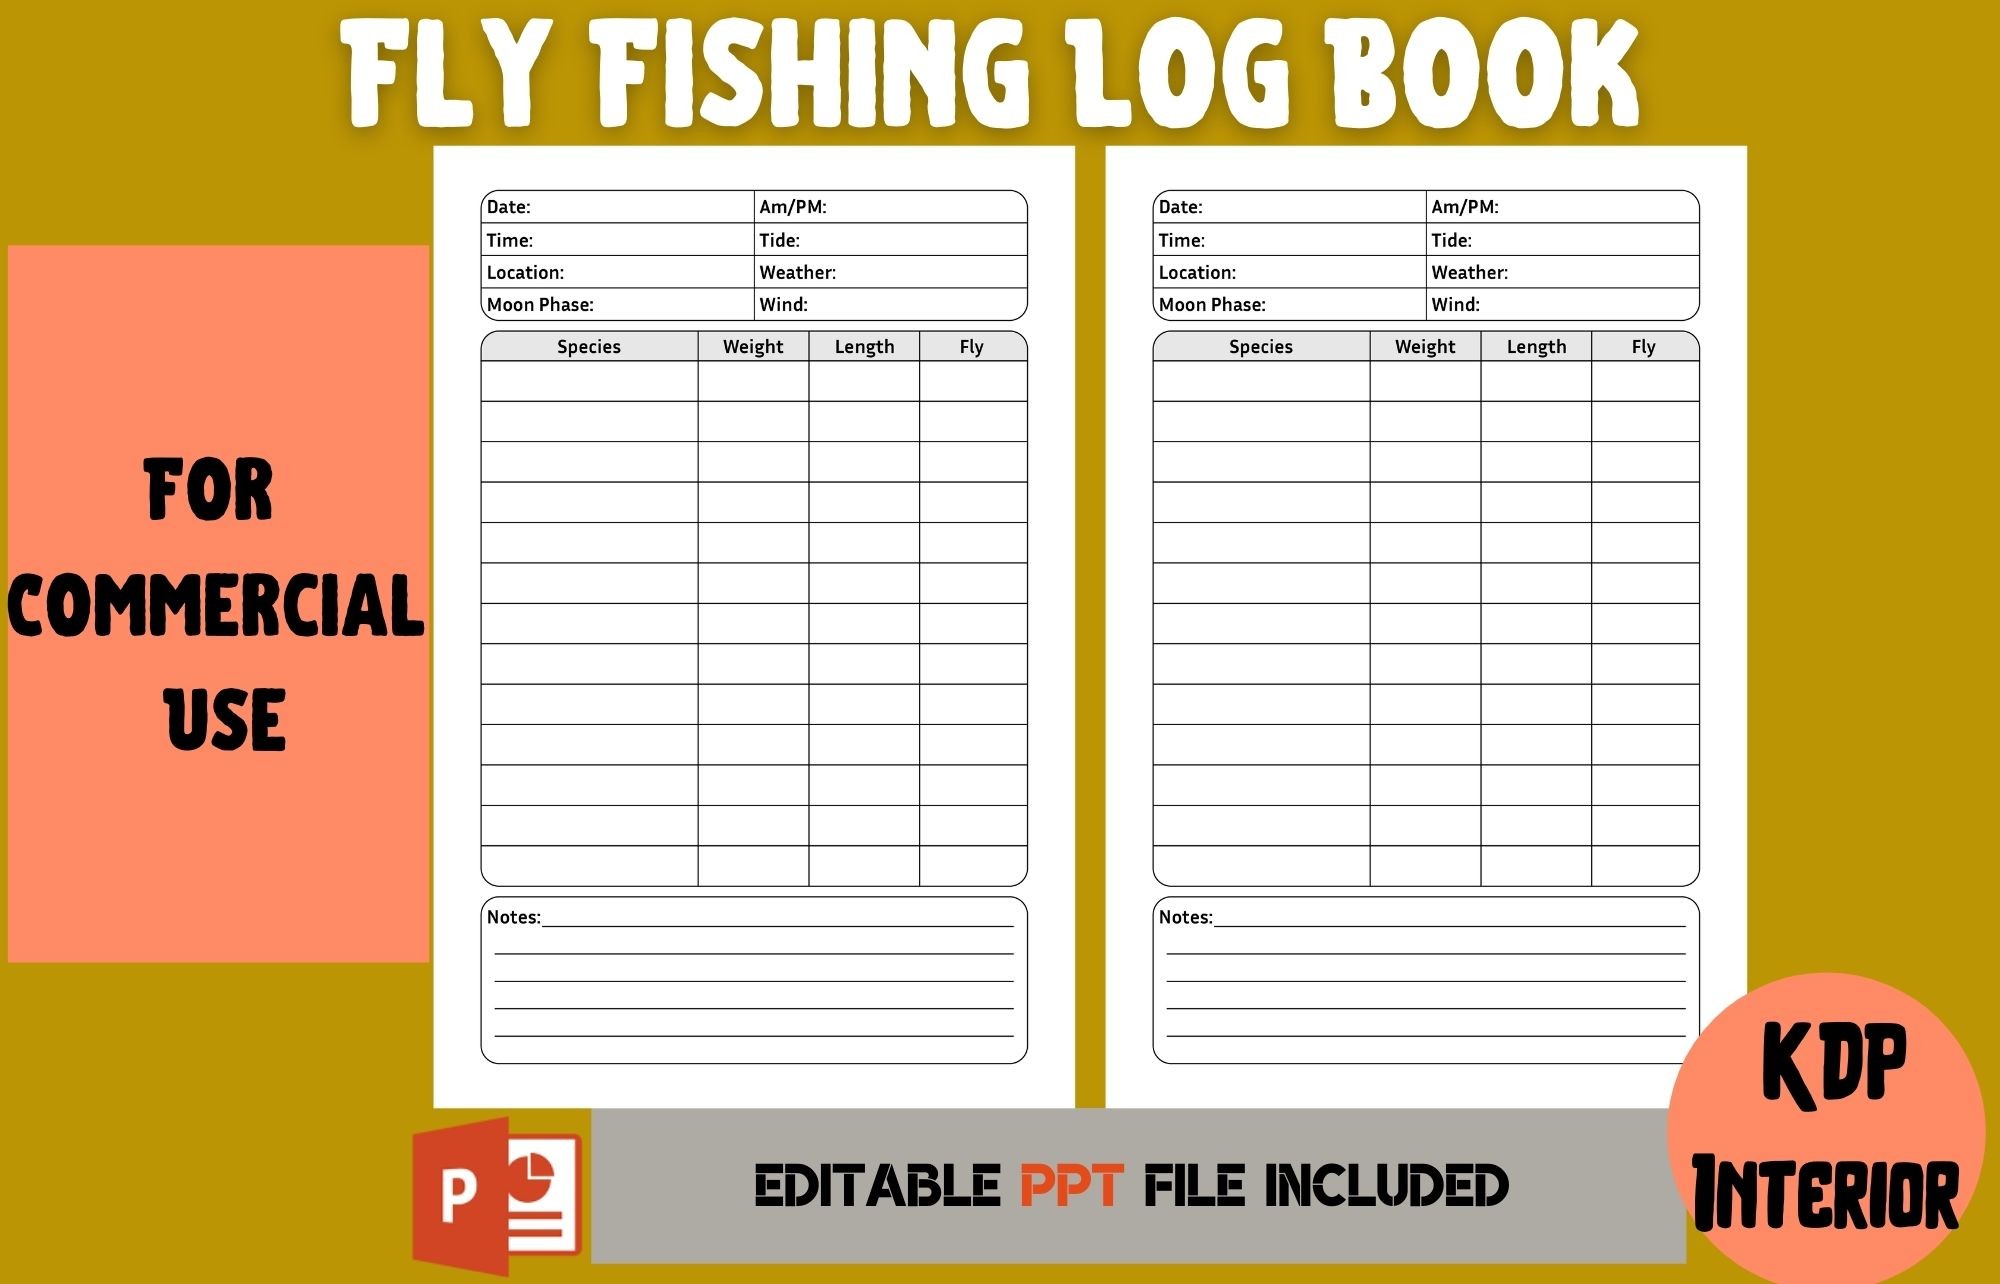 Fishing Journal Log for Kids Graphic by Titania Creative